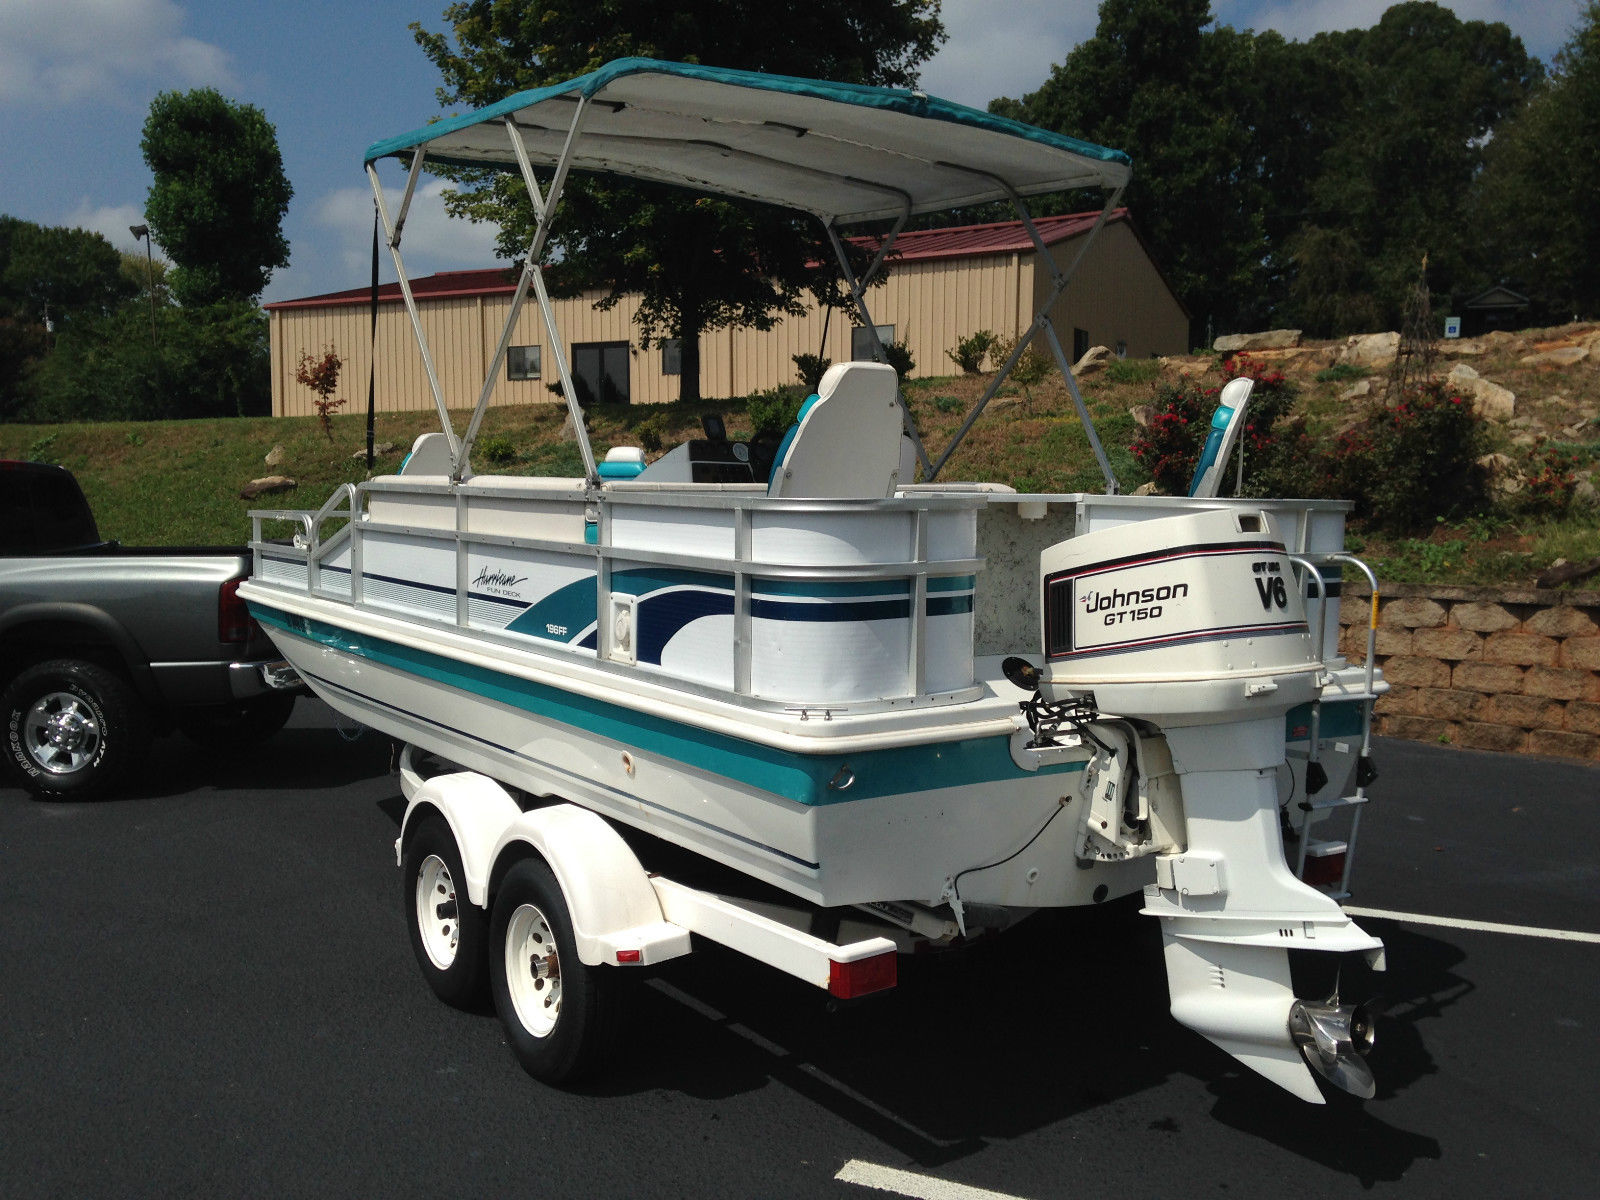 Hurricane Fun Deck 196 FF 1996 for sale for $2,500 - Boats 